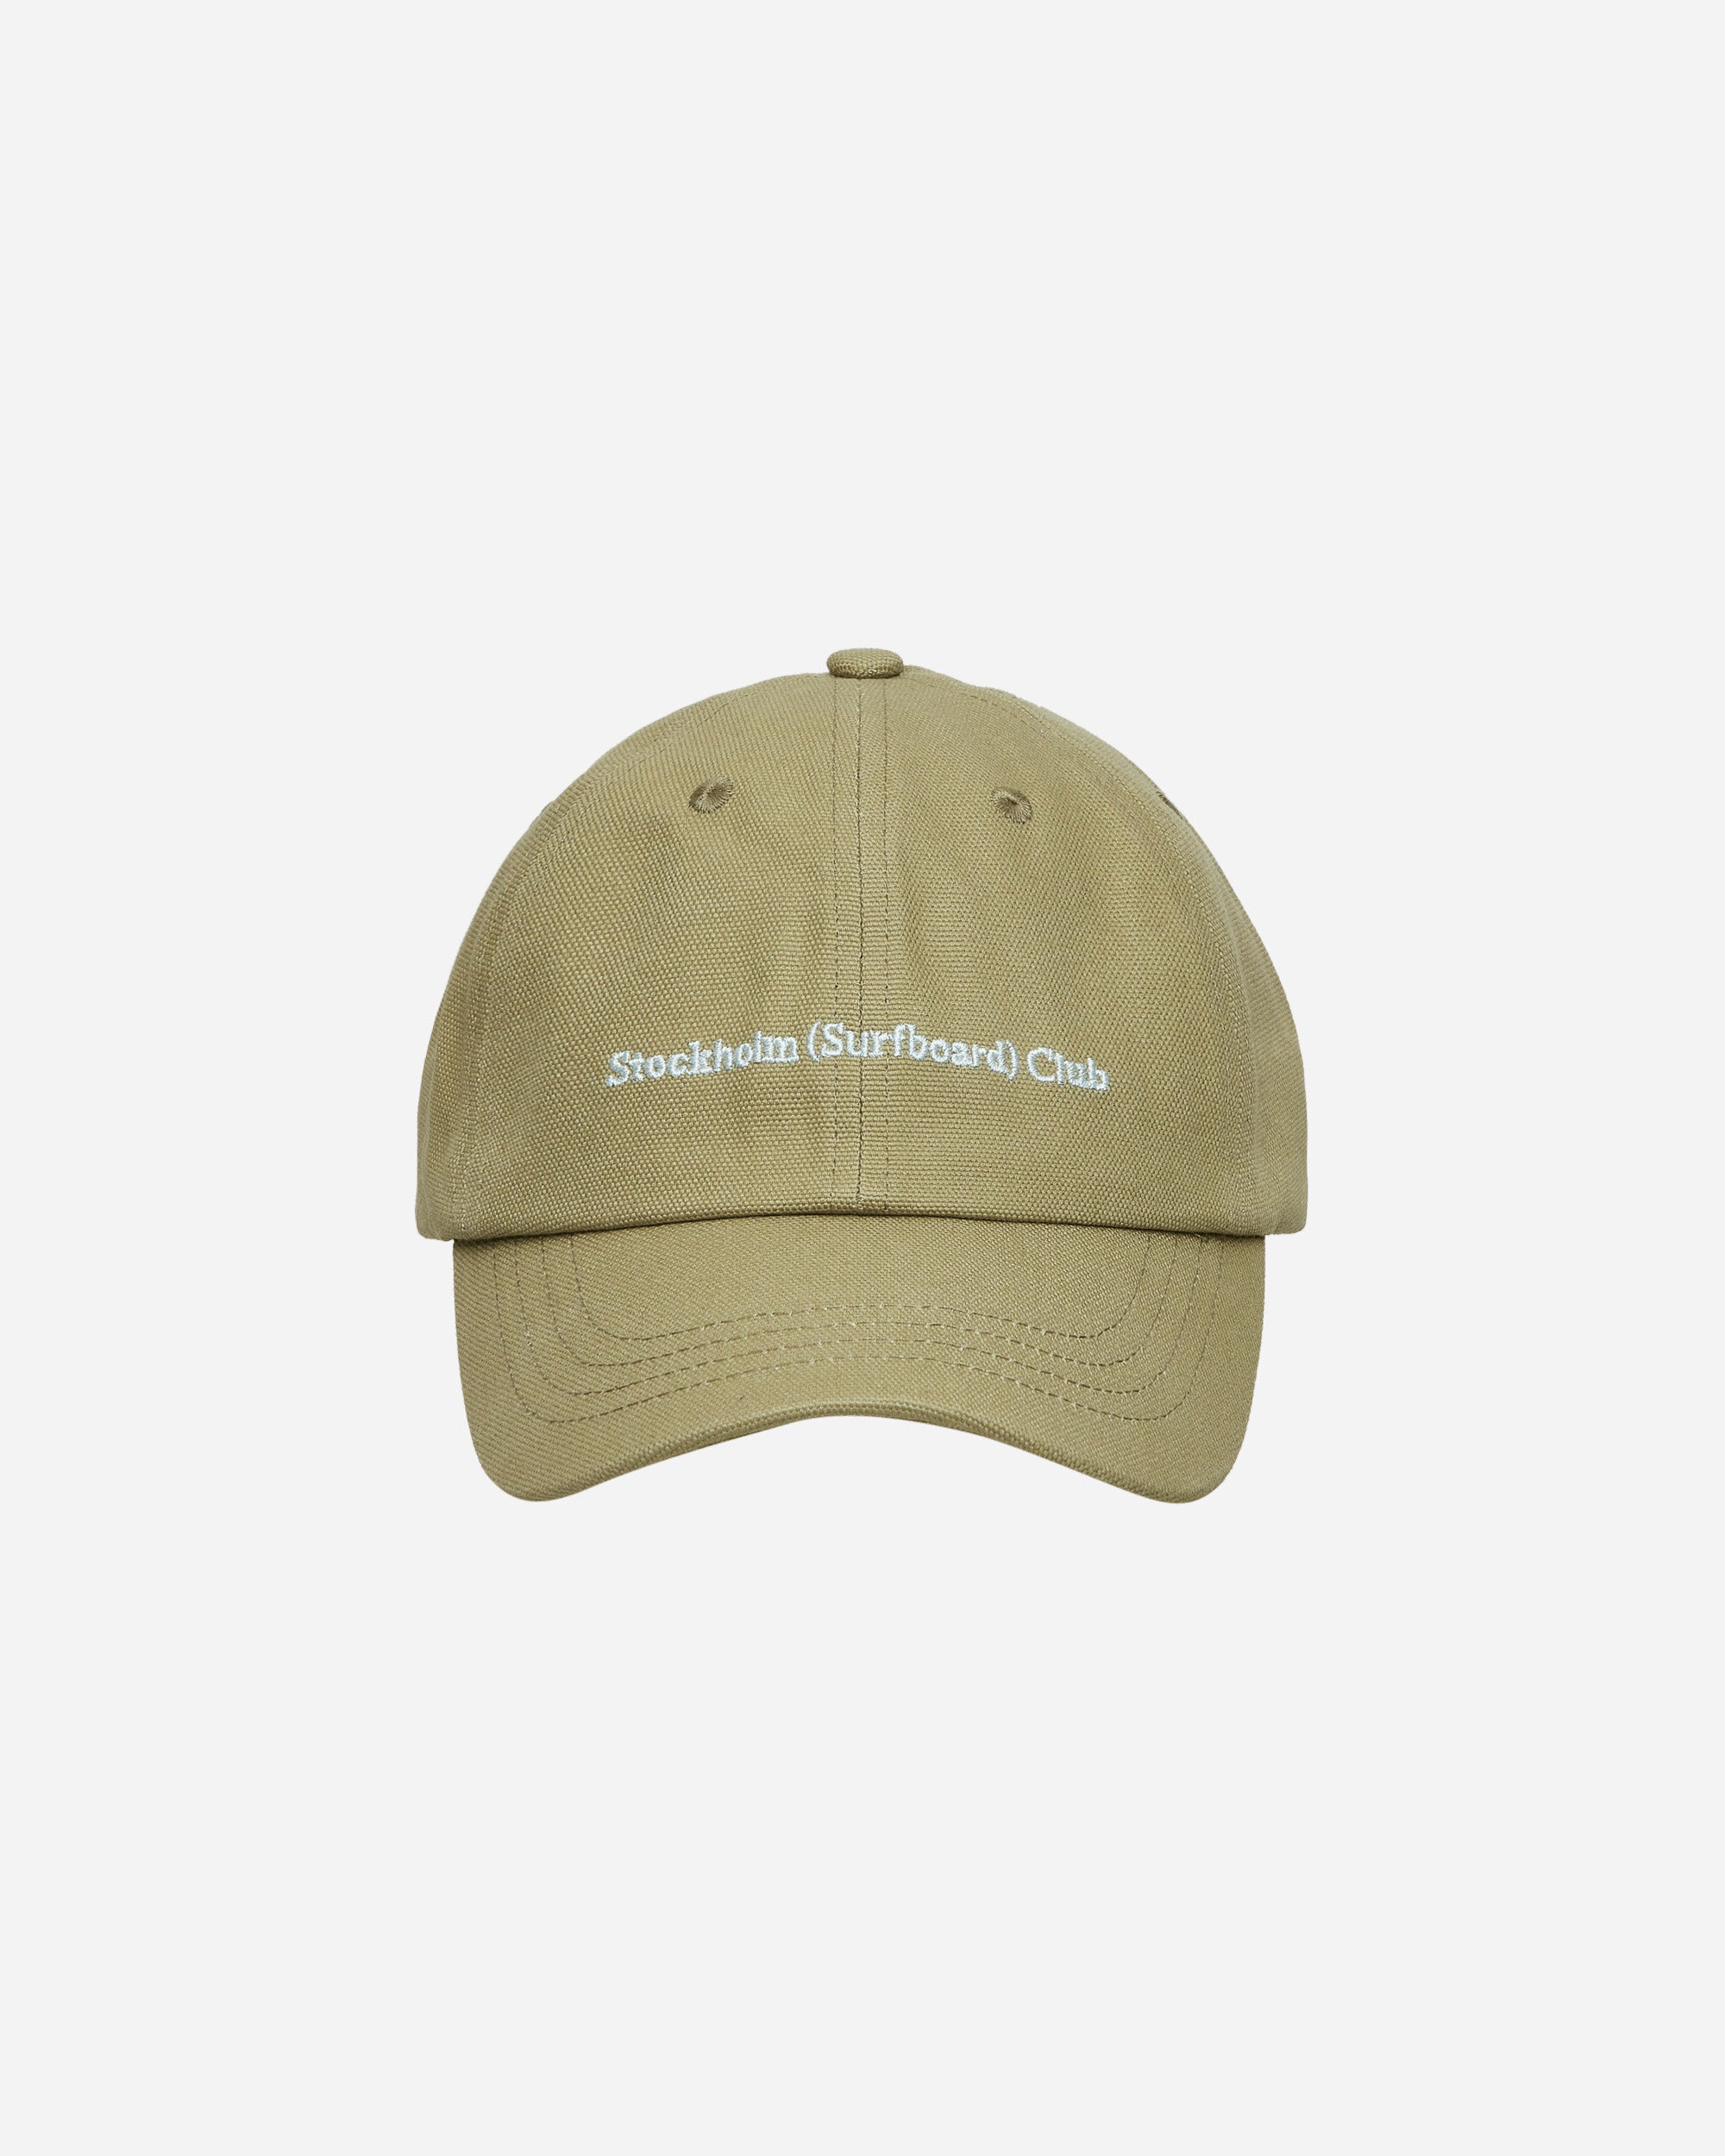 Stockholm (Surfboard) Club Pac Olive  Hats Caps PU7G31 001